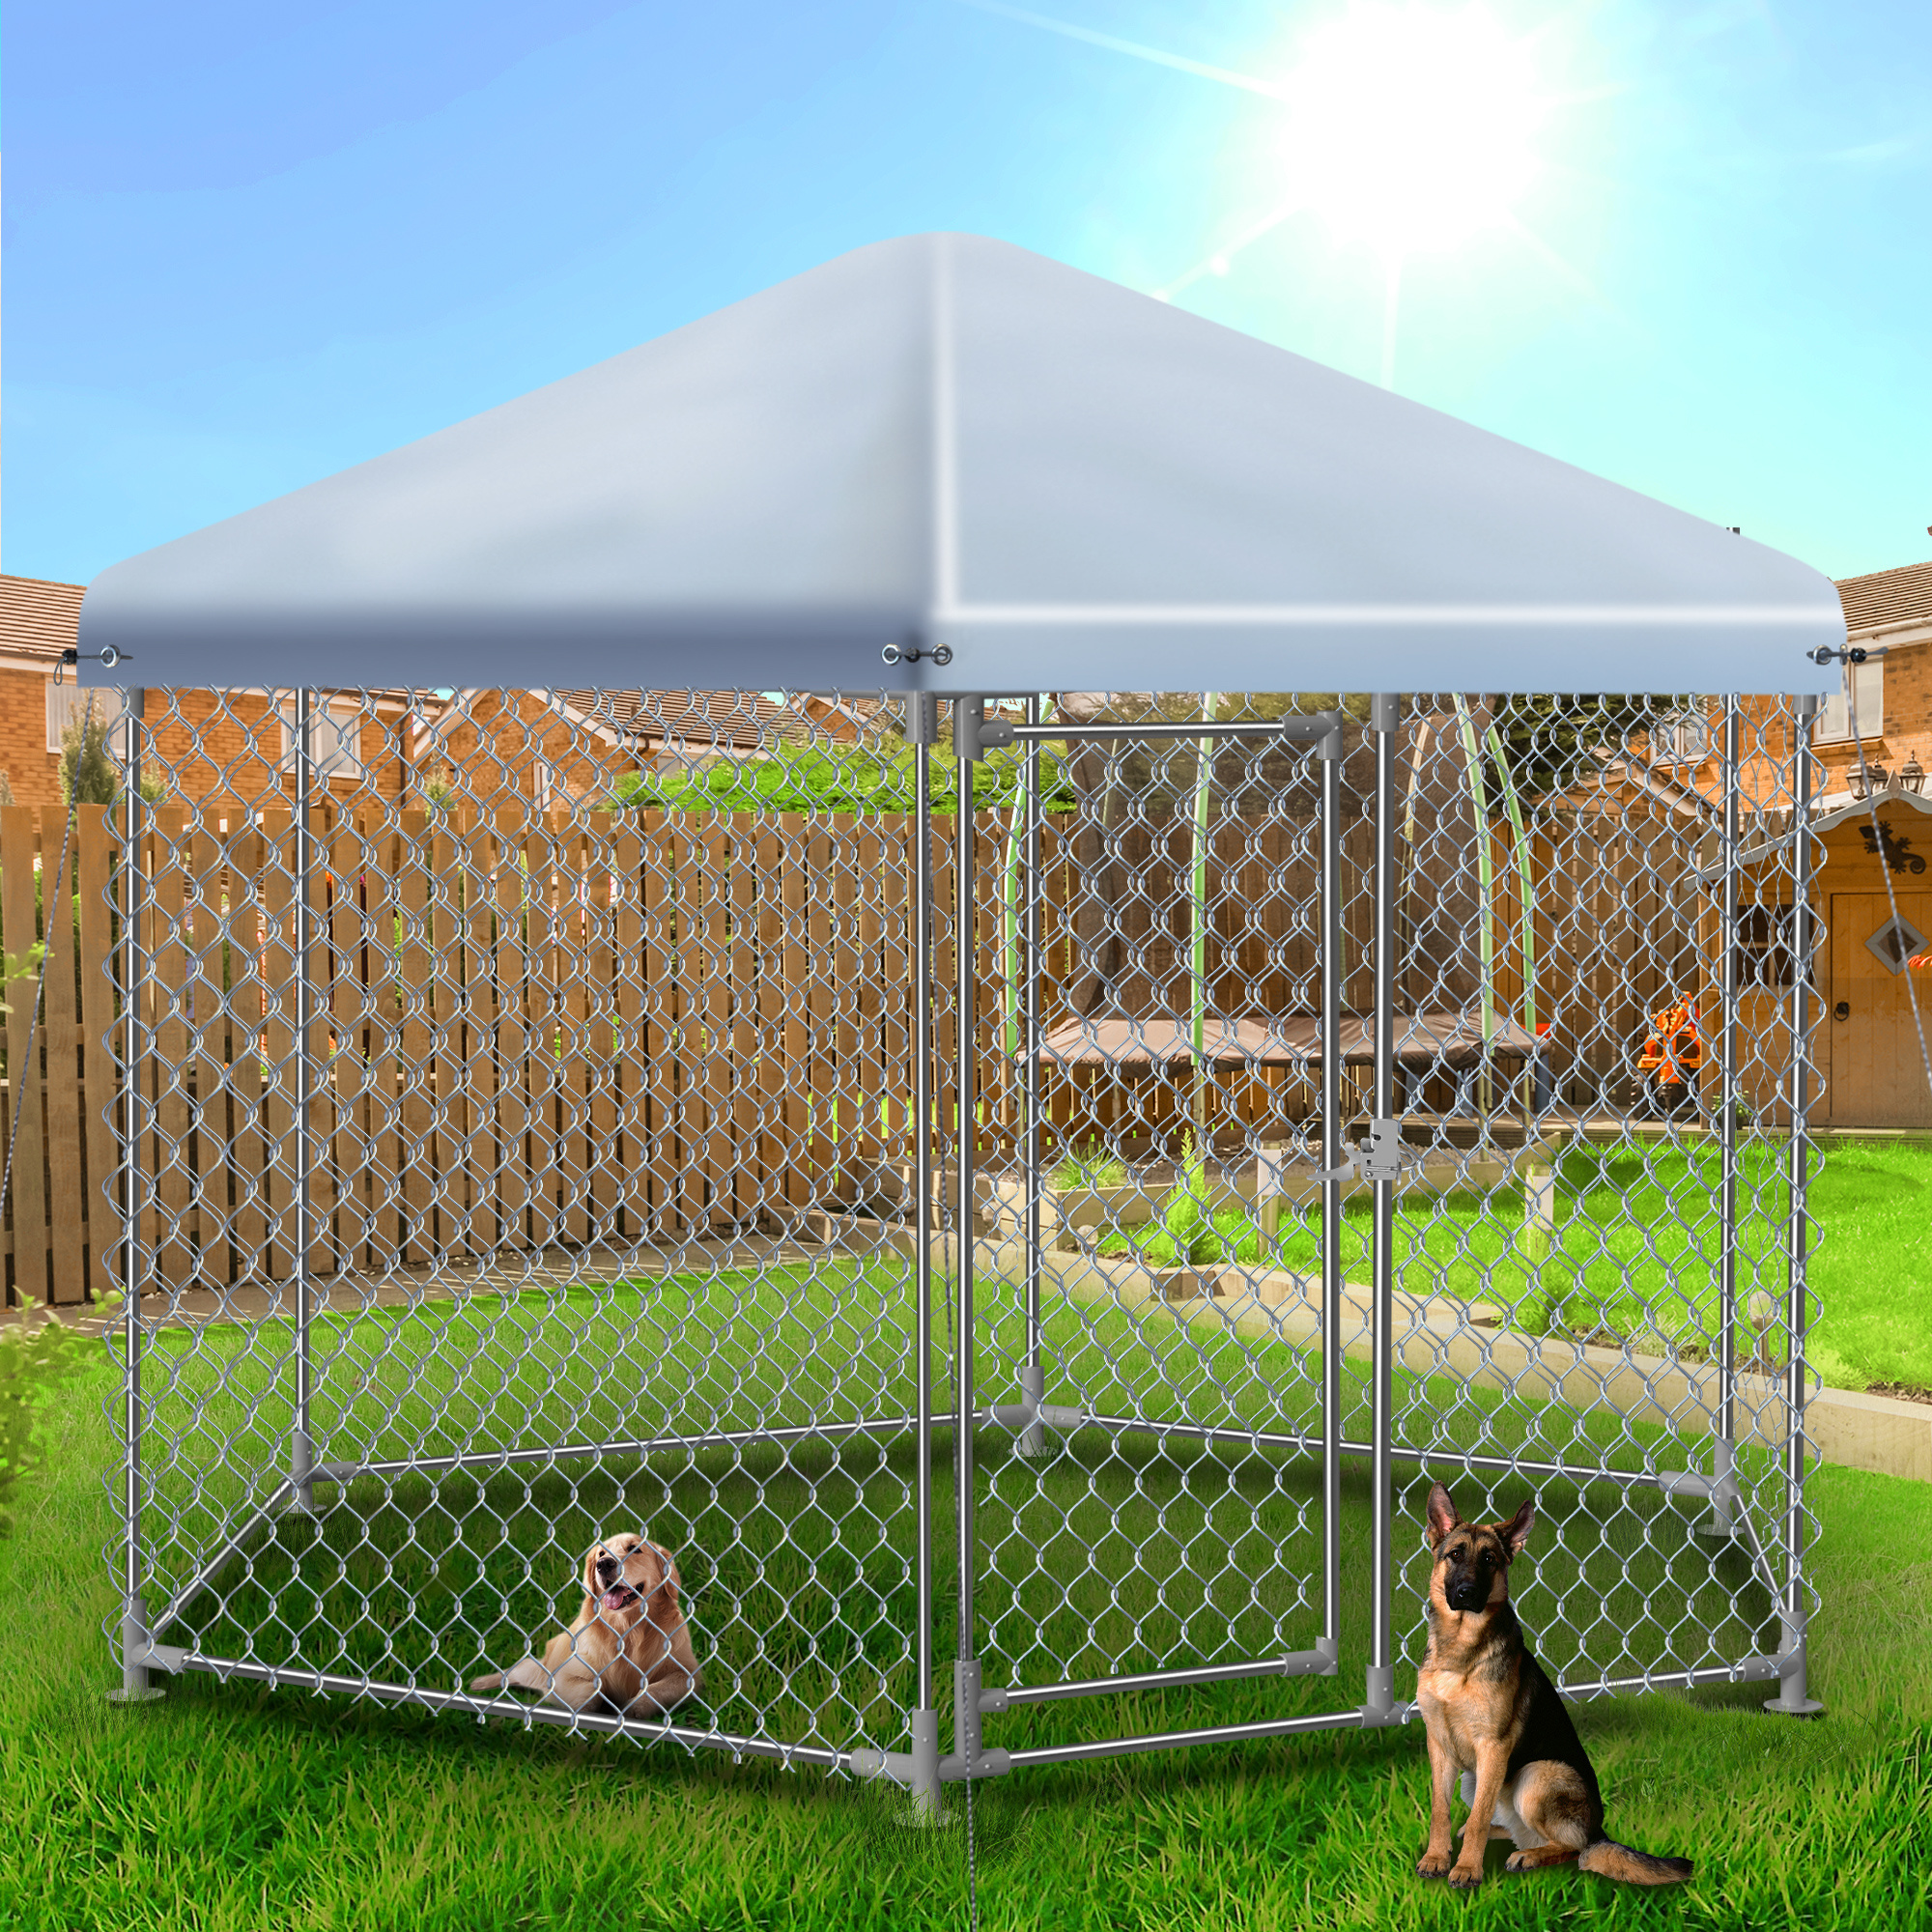 

Large Dog Kennel Outside With Roof,outdoor Dog Kennel With Metal Gate,heavy Duty Dog Kennel With Lock For Outdoor Backyard.